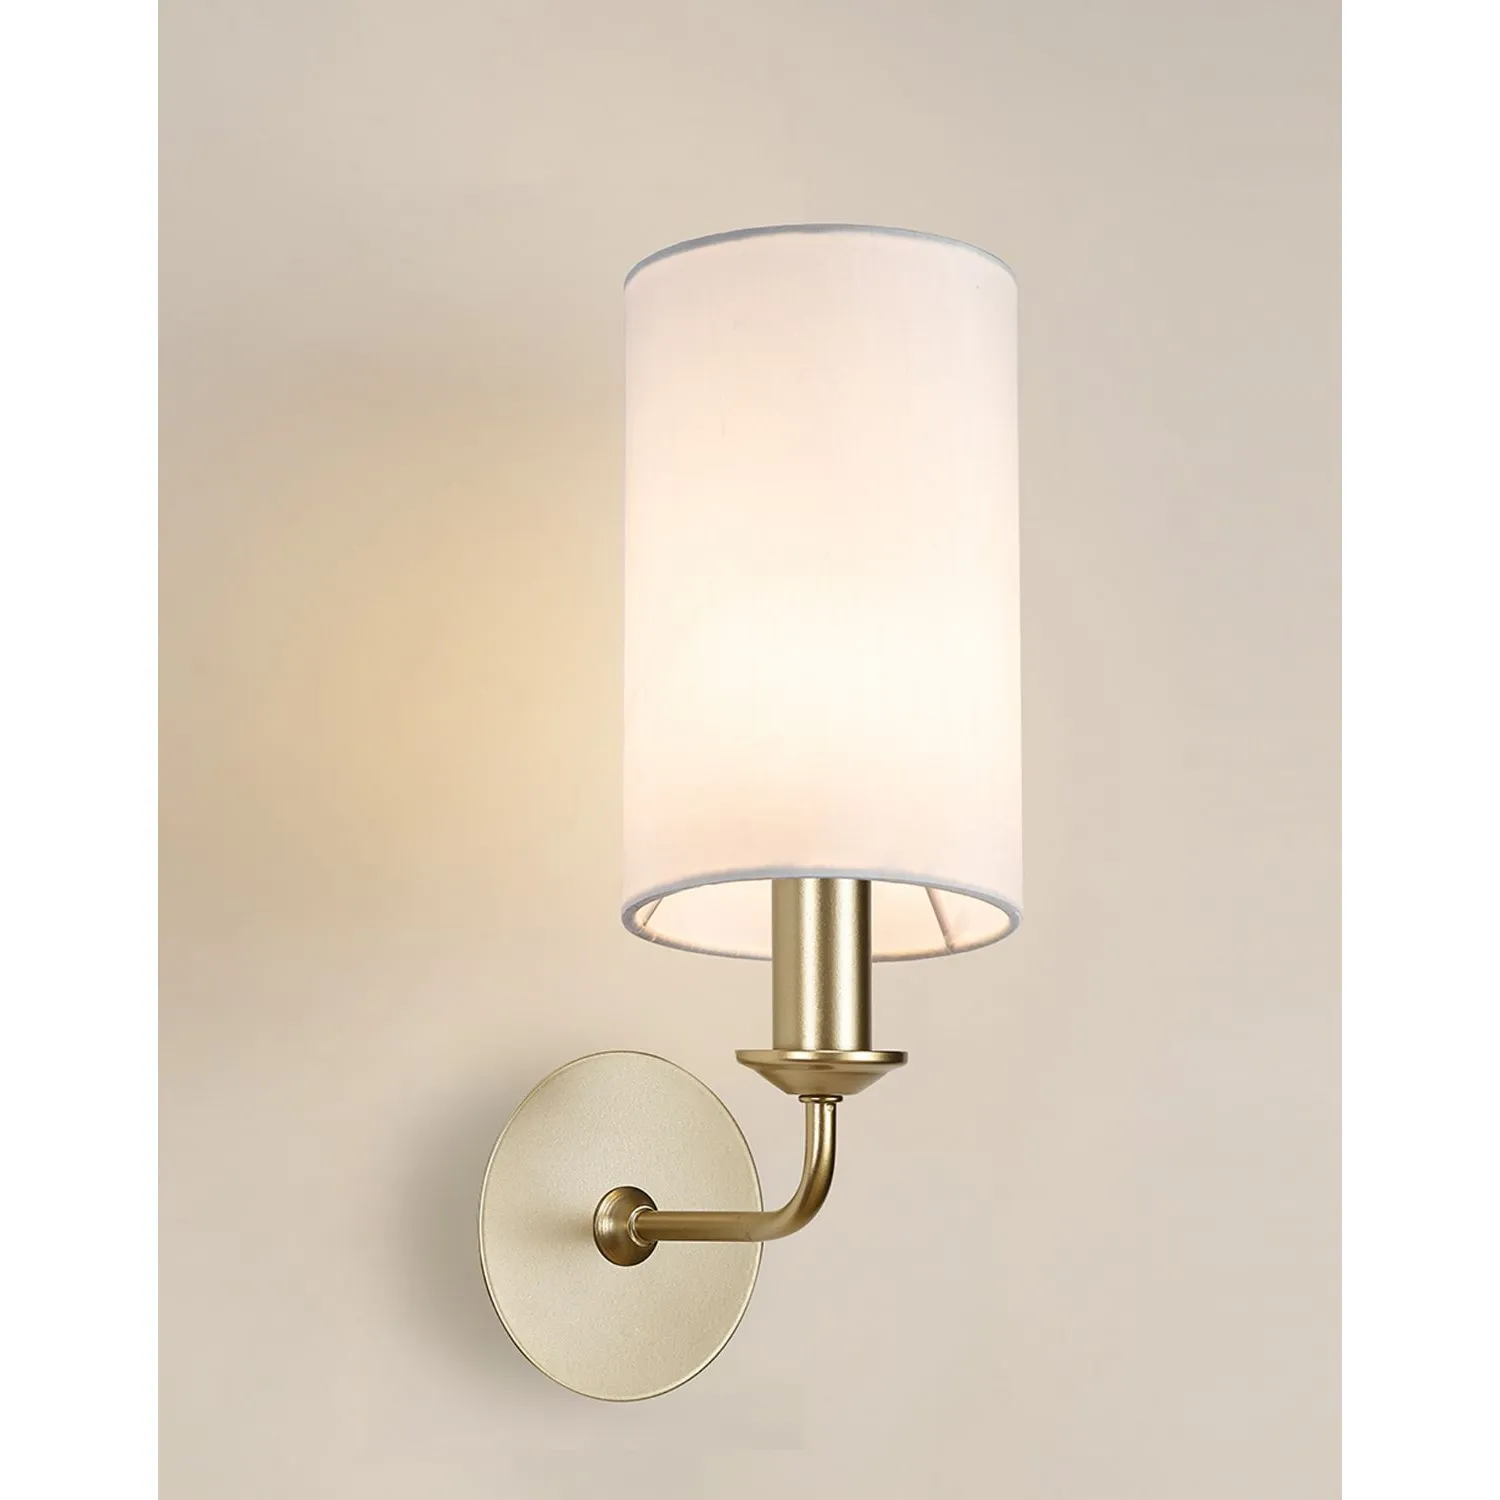 Banyan 1 Light Switched Wall Lamp With 120 x 200mm Faux Silk Fabric Shade Painted Champagne Gold White